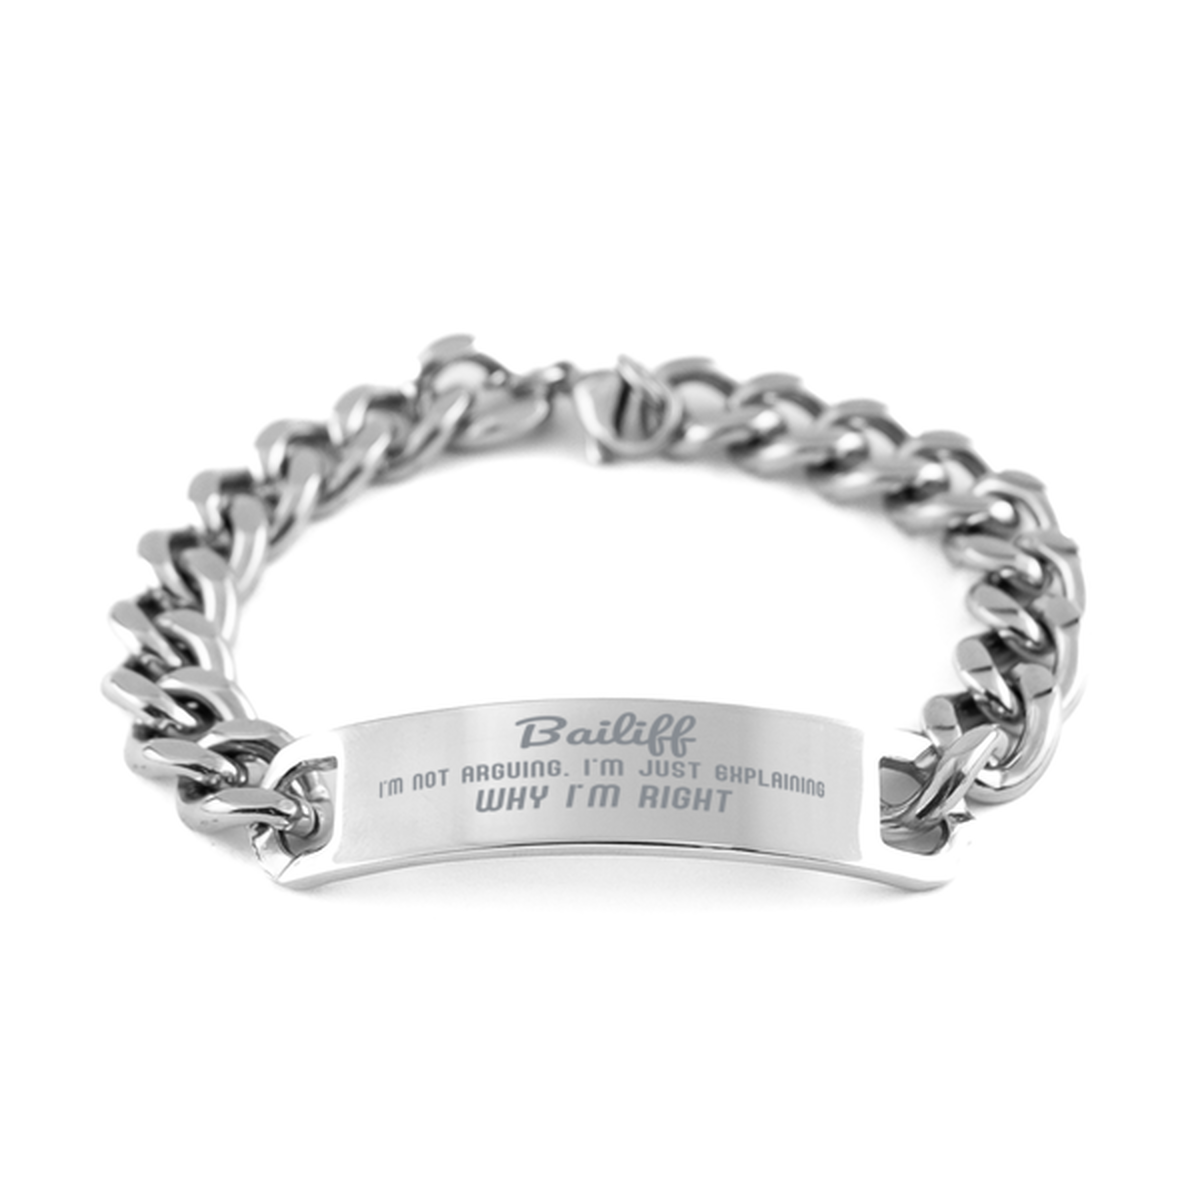 Bailiff I'm not Arguing. I'm Just Explaining Why I'm RIGHT Cuban Chain Stainless Steel Bracelet, Graduation Birthday Christmas Bailiff Gifts For Bailiff Funny Saying Quote Present for Men Women Coworker